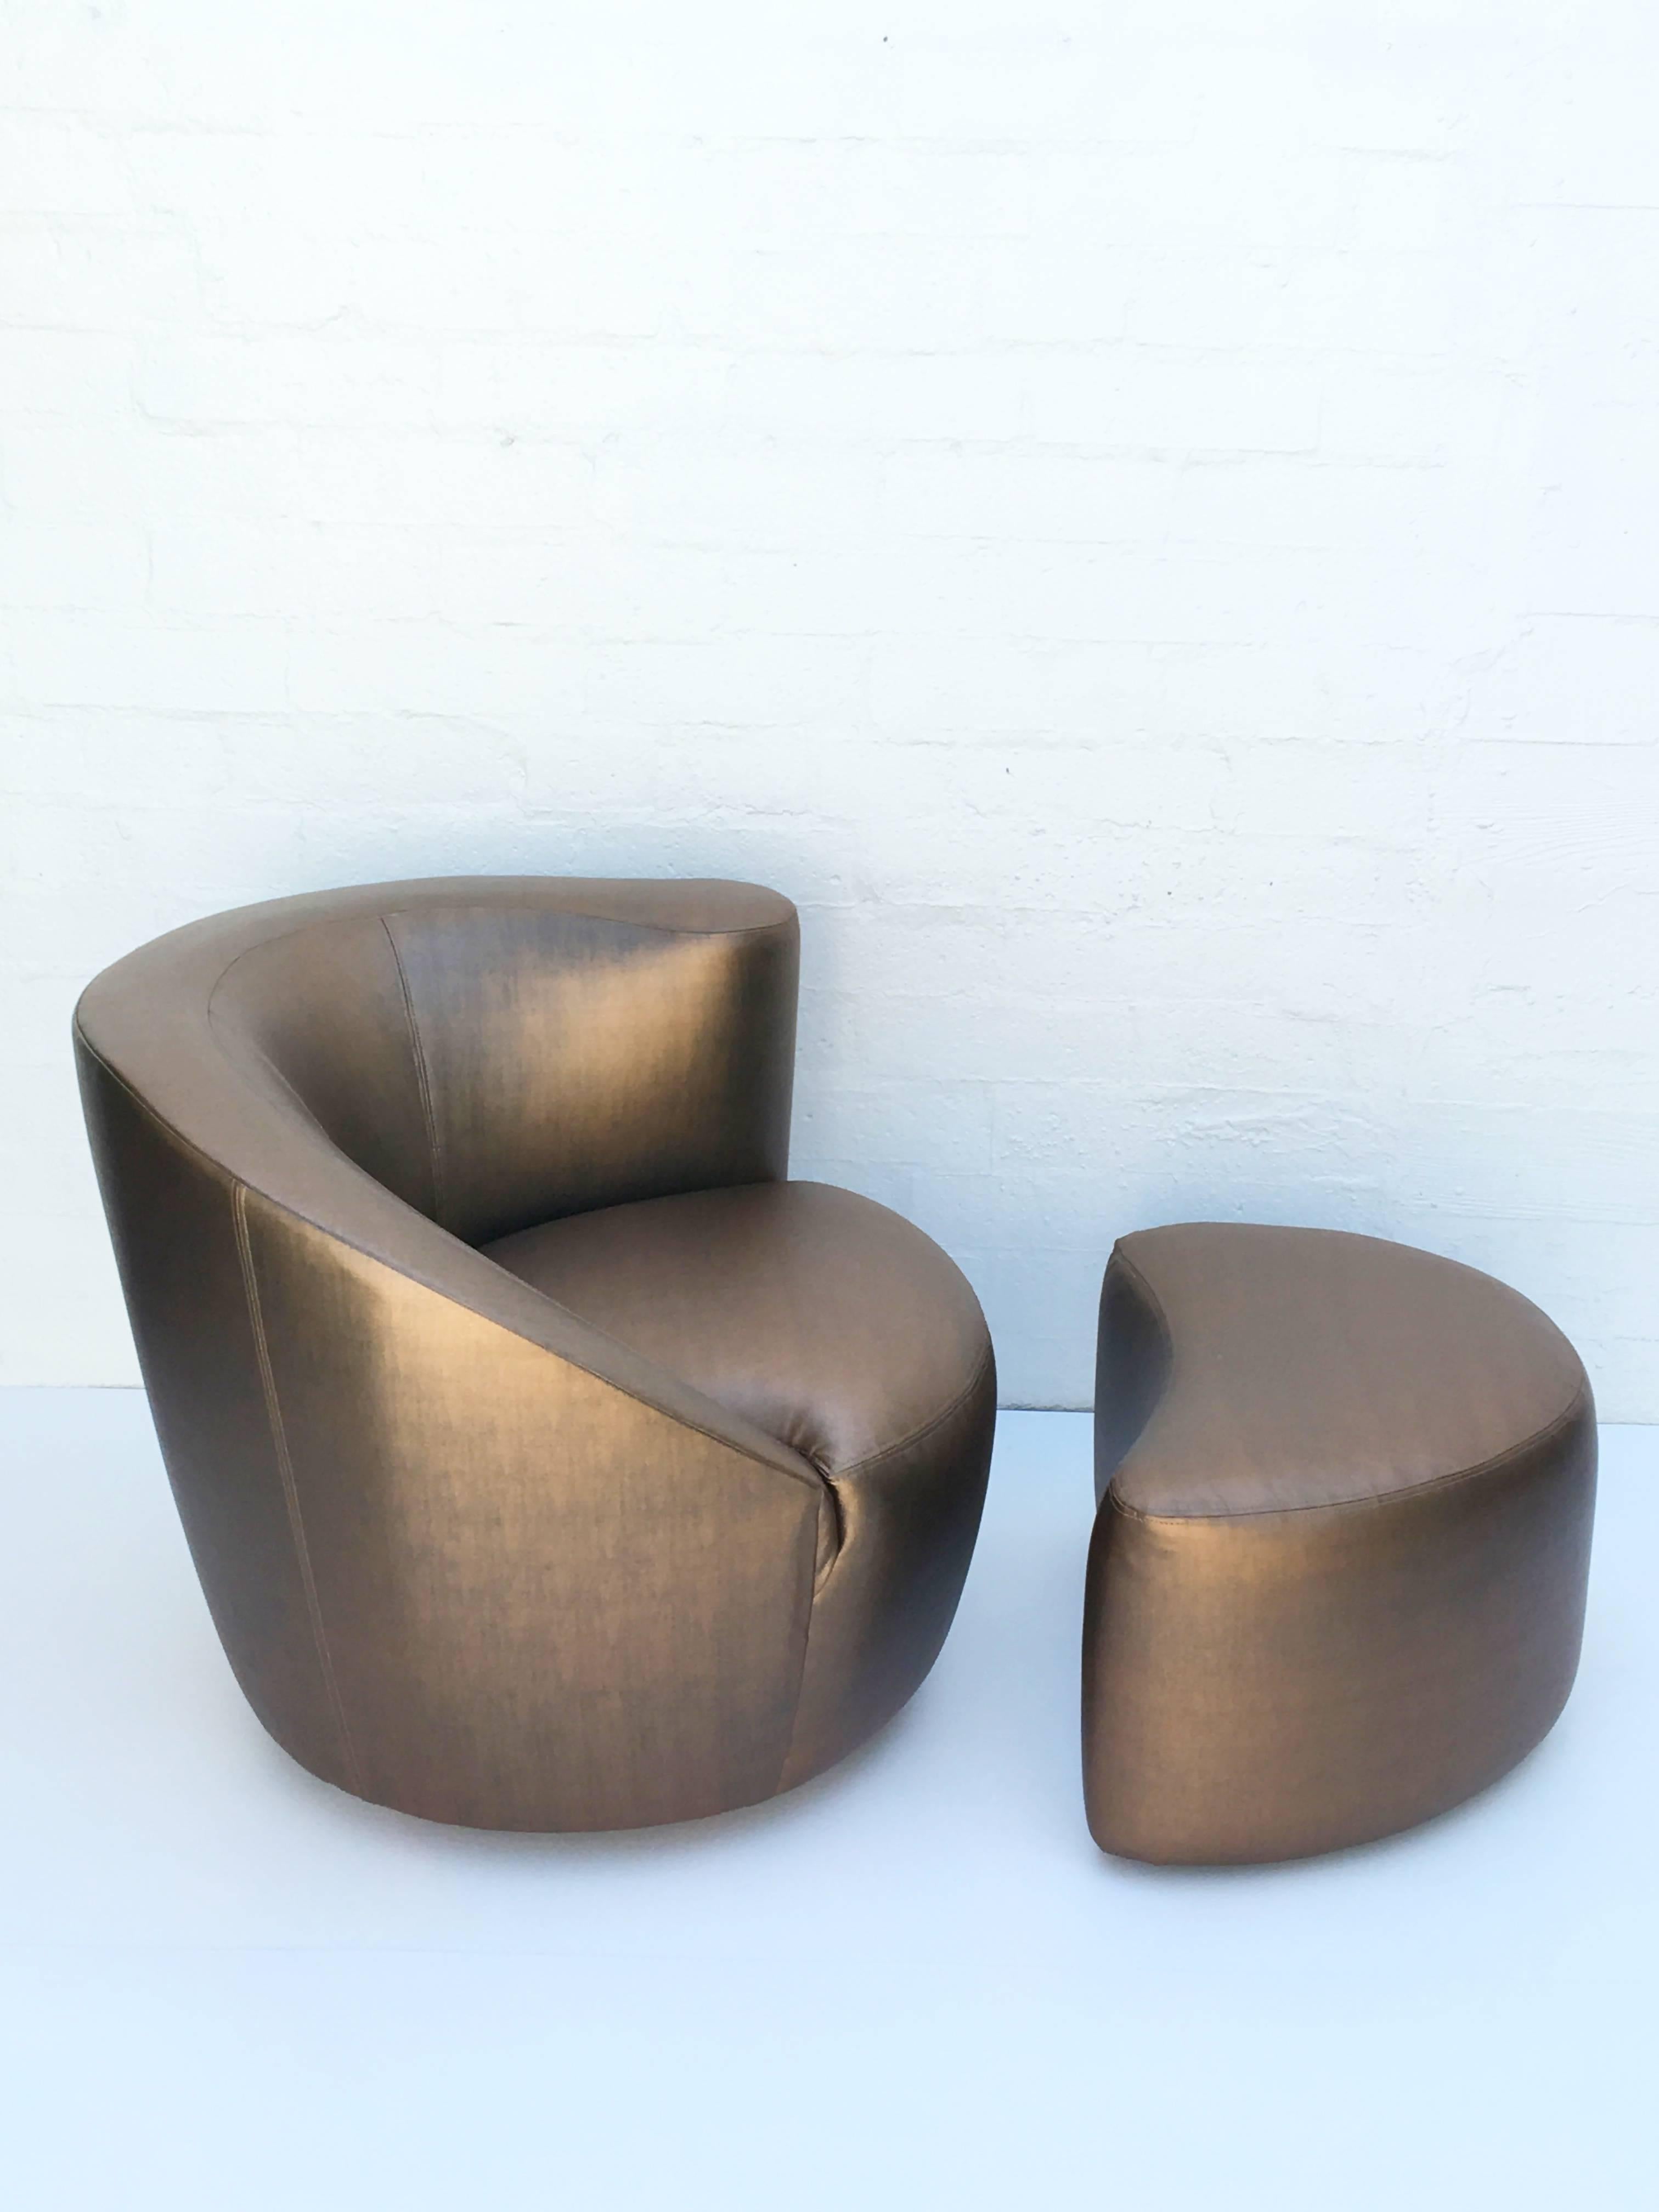 Modern Pair of Swivel Lounge Chairs and Ottomans by Vladimir Kagan 1927-2016